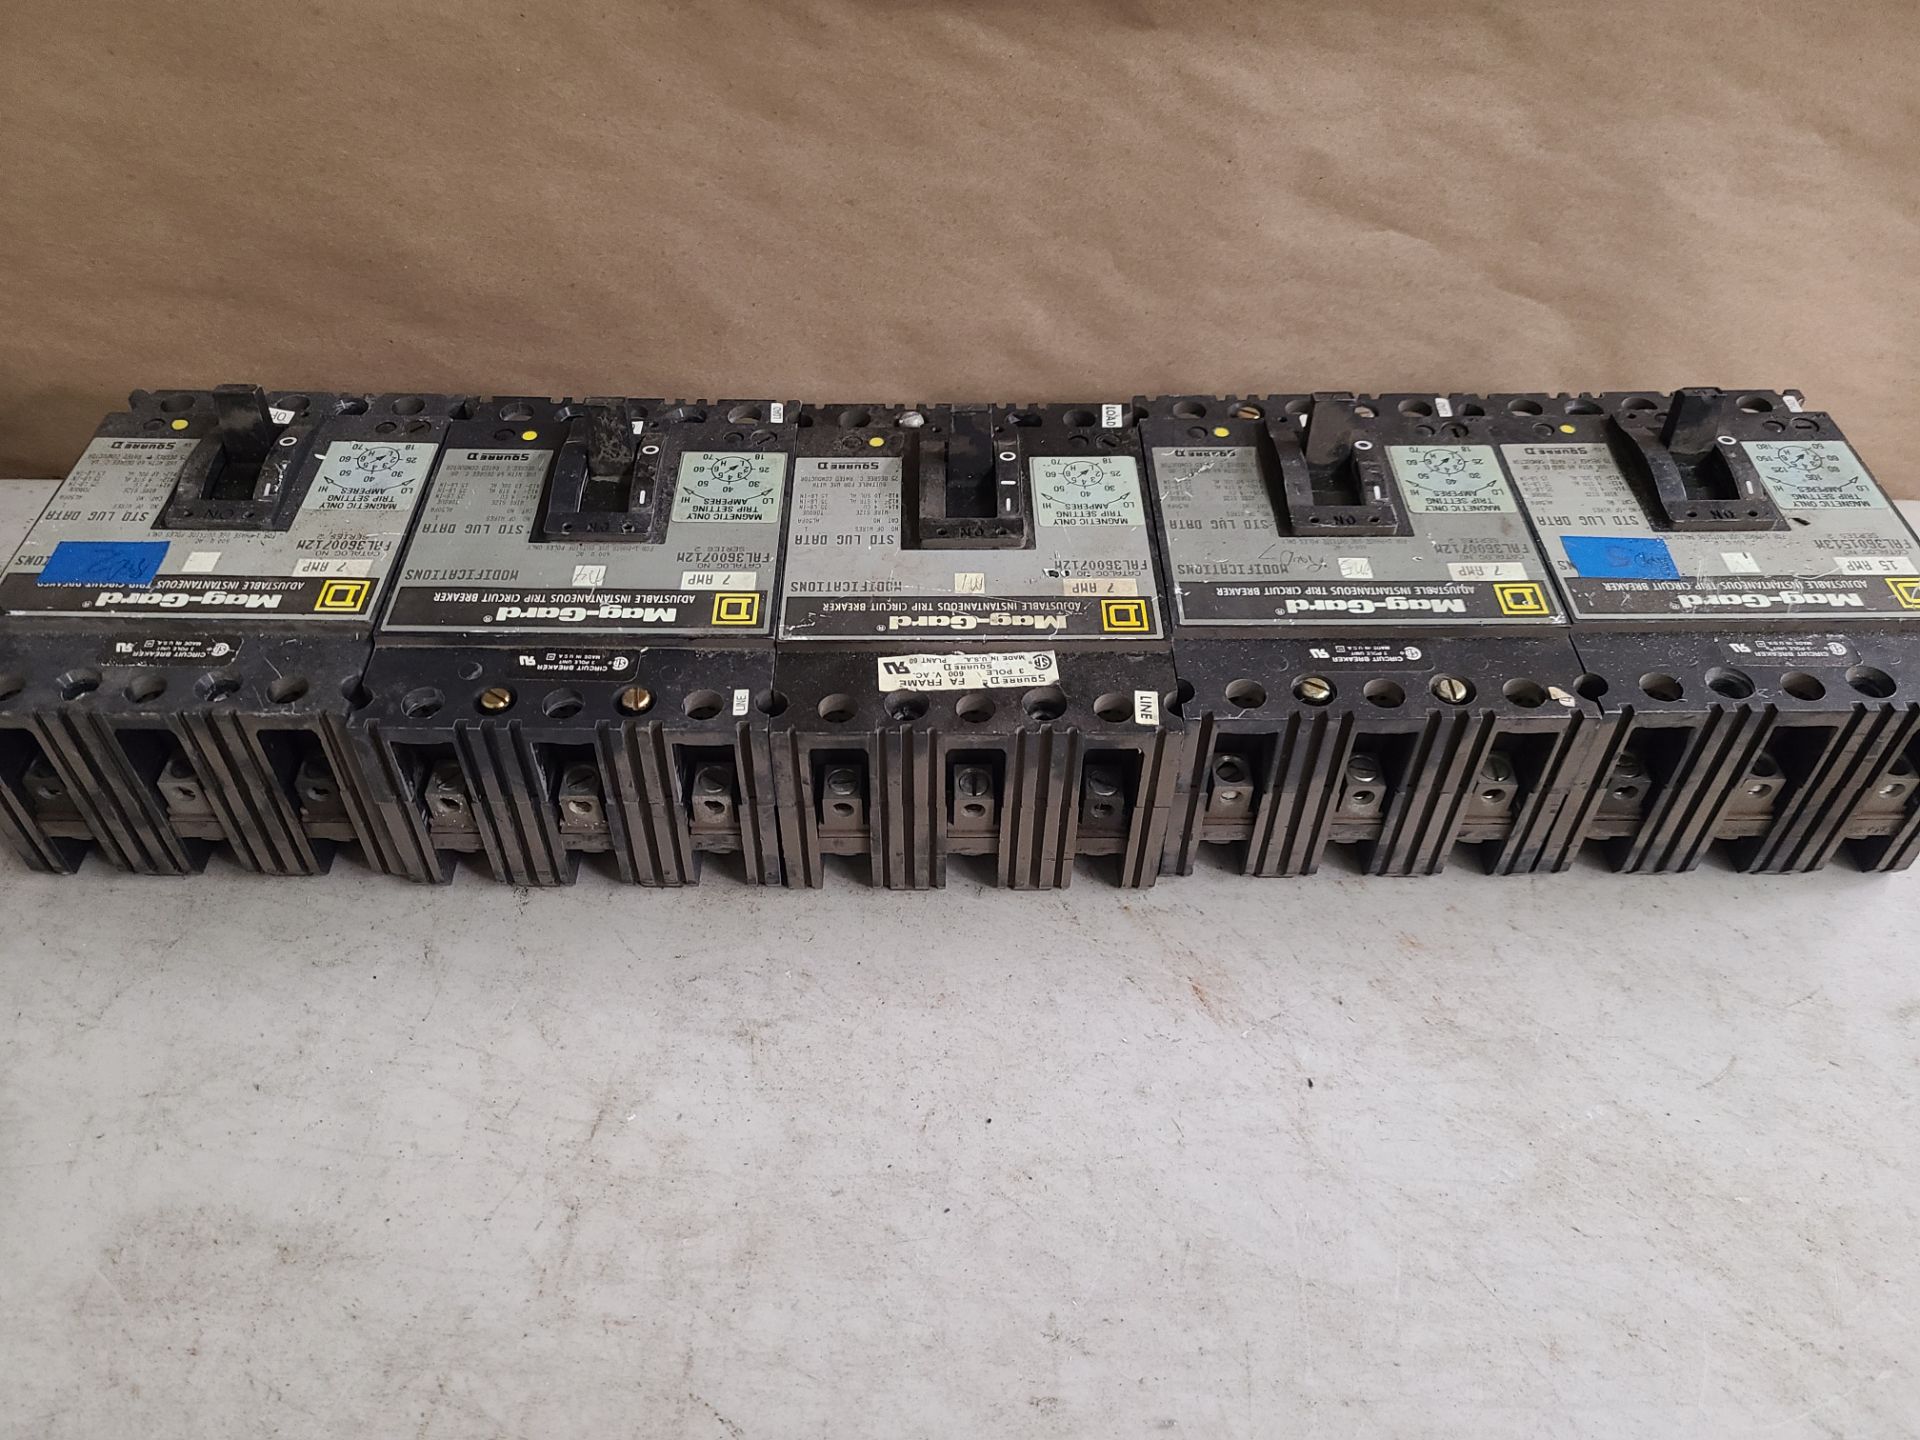 LOT OF SQUARE D MAG-GARD INDUSTRIAL MOLDED CASE CIRCUIT BREAKERS - Image 10 of 11